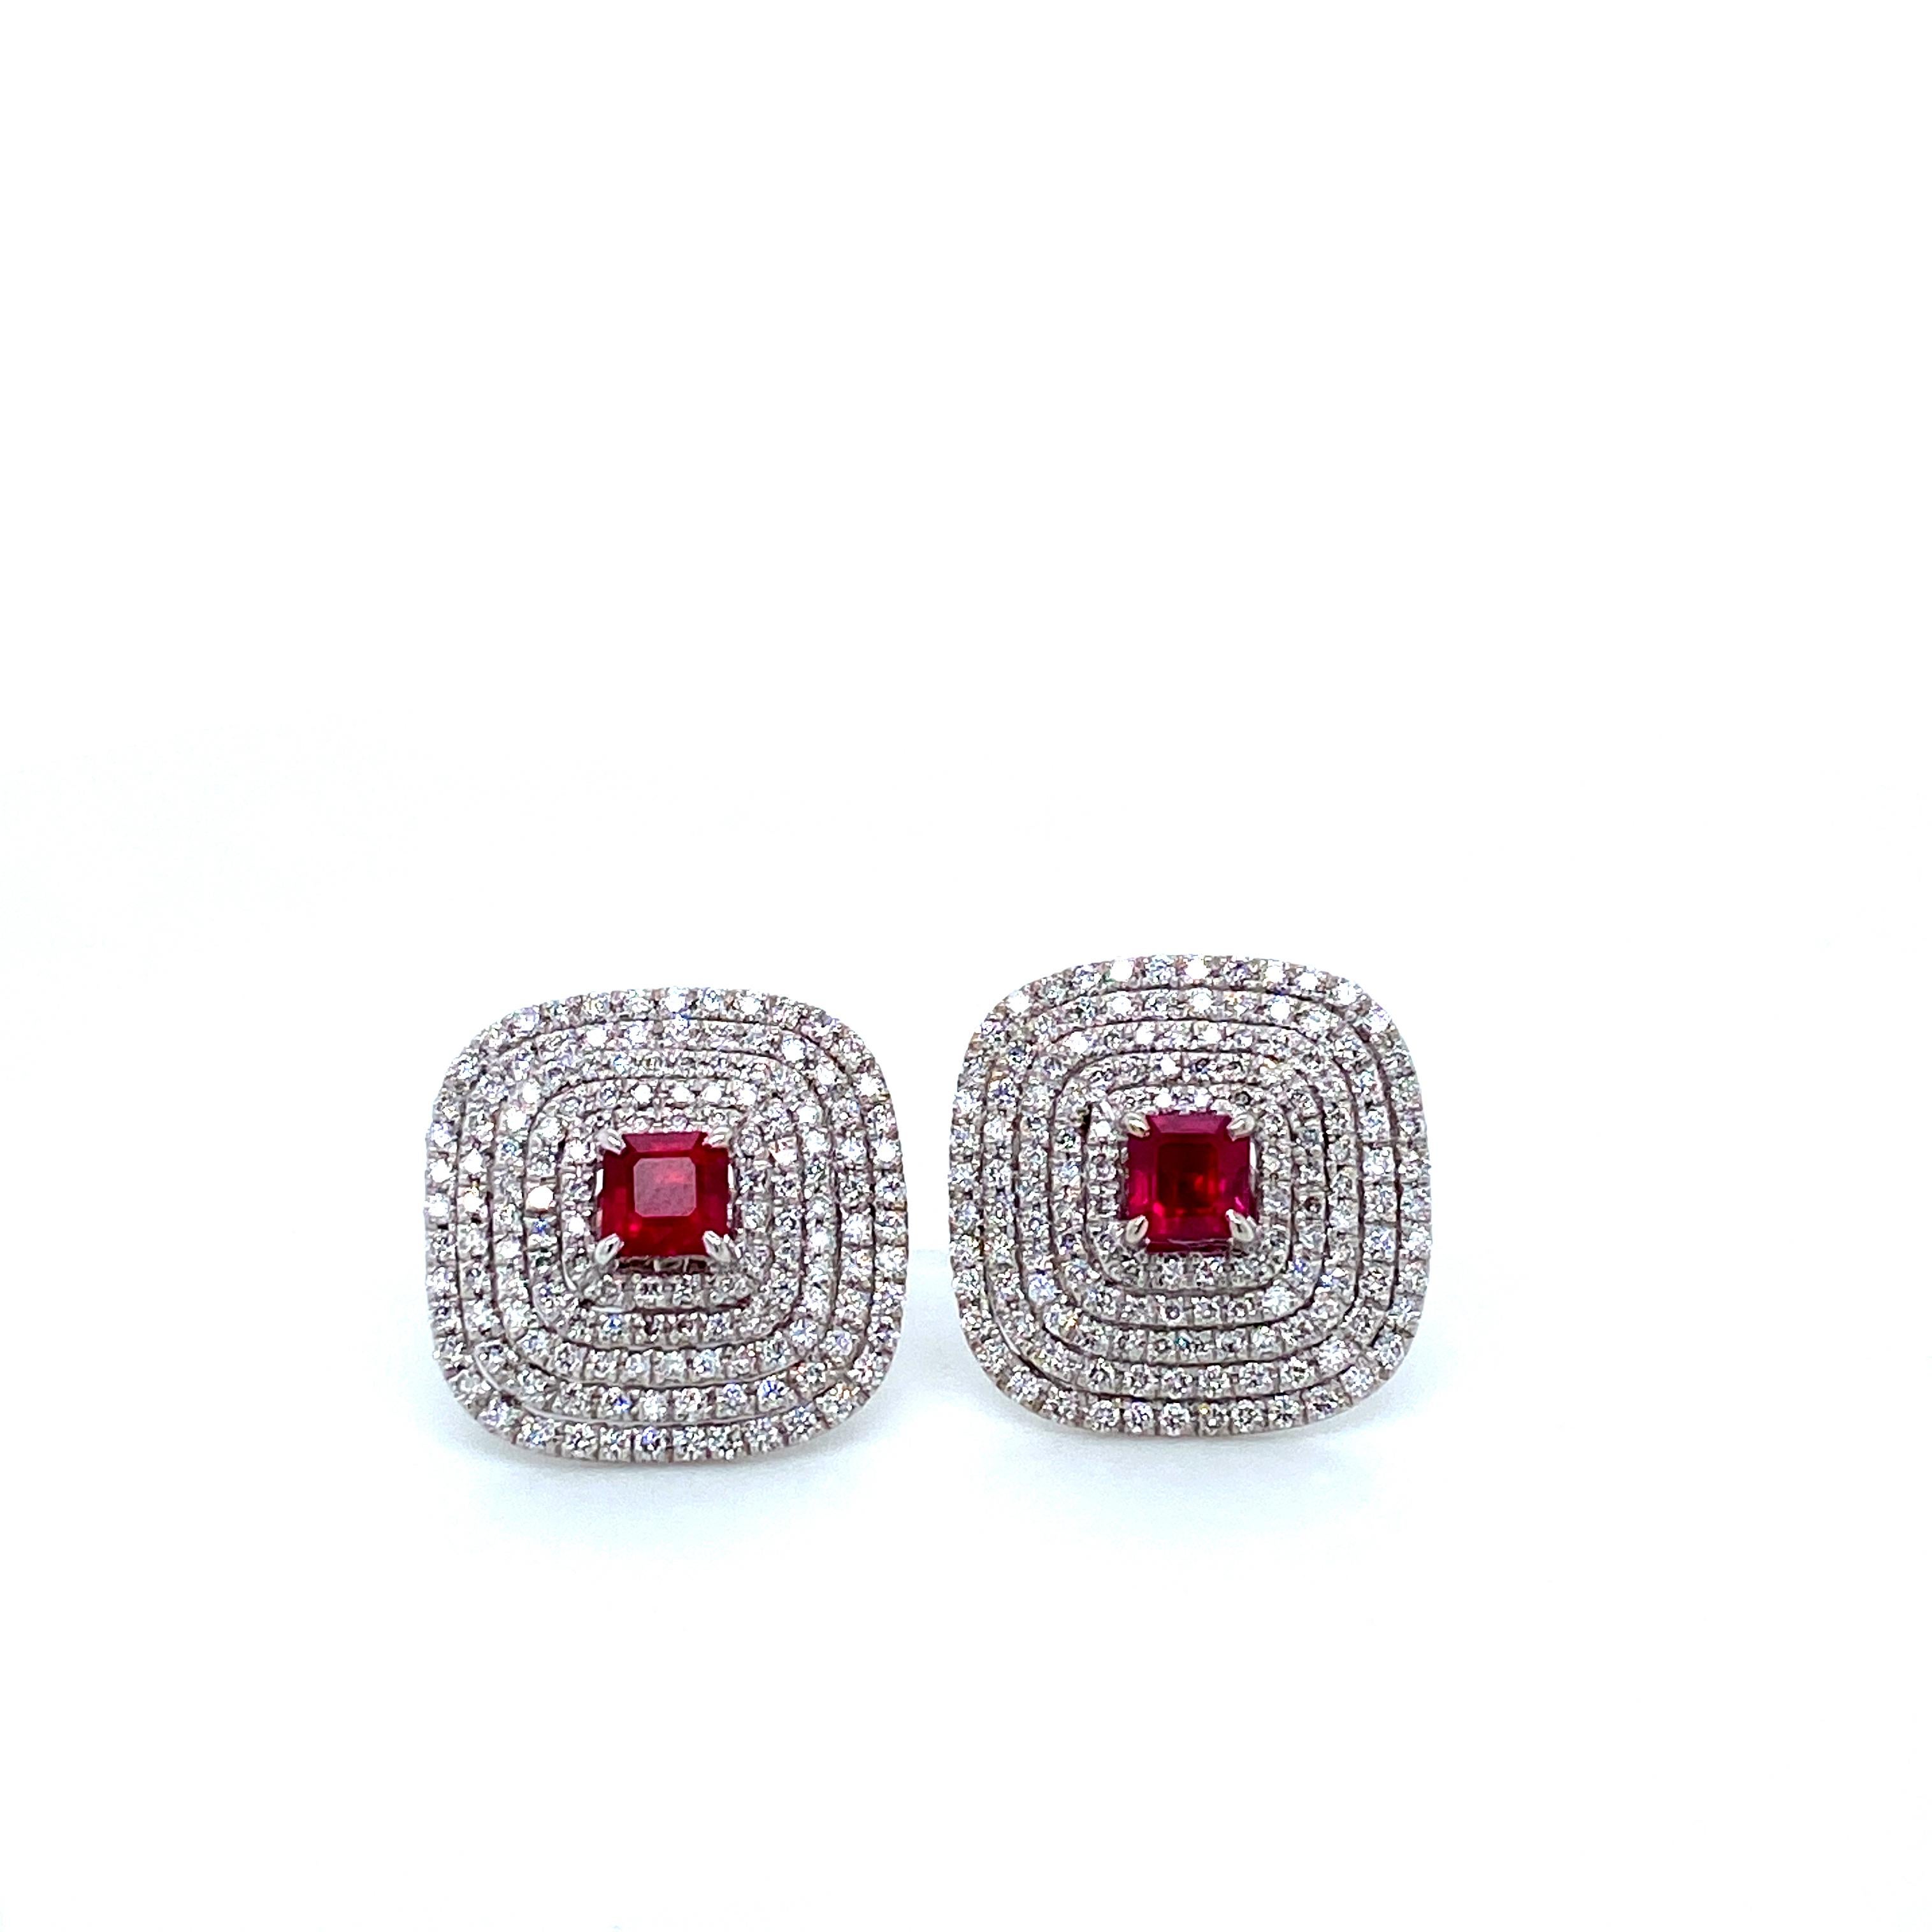 1.72 Carat Vivid Red Ruby And White Diamond Gold Earrings:

A simple and elegant pair of earrings, it features two square-cut vivid red rubies weighing 1.72 carat, surrounded by white diamonds weighing 1.7 carat. The rubies possess a rich vivid red